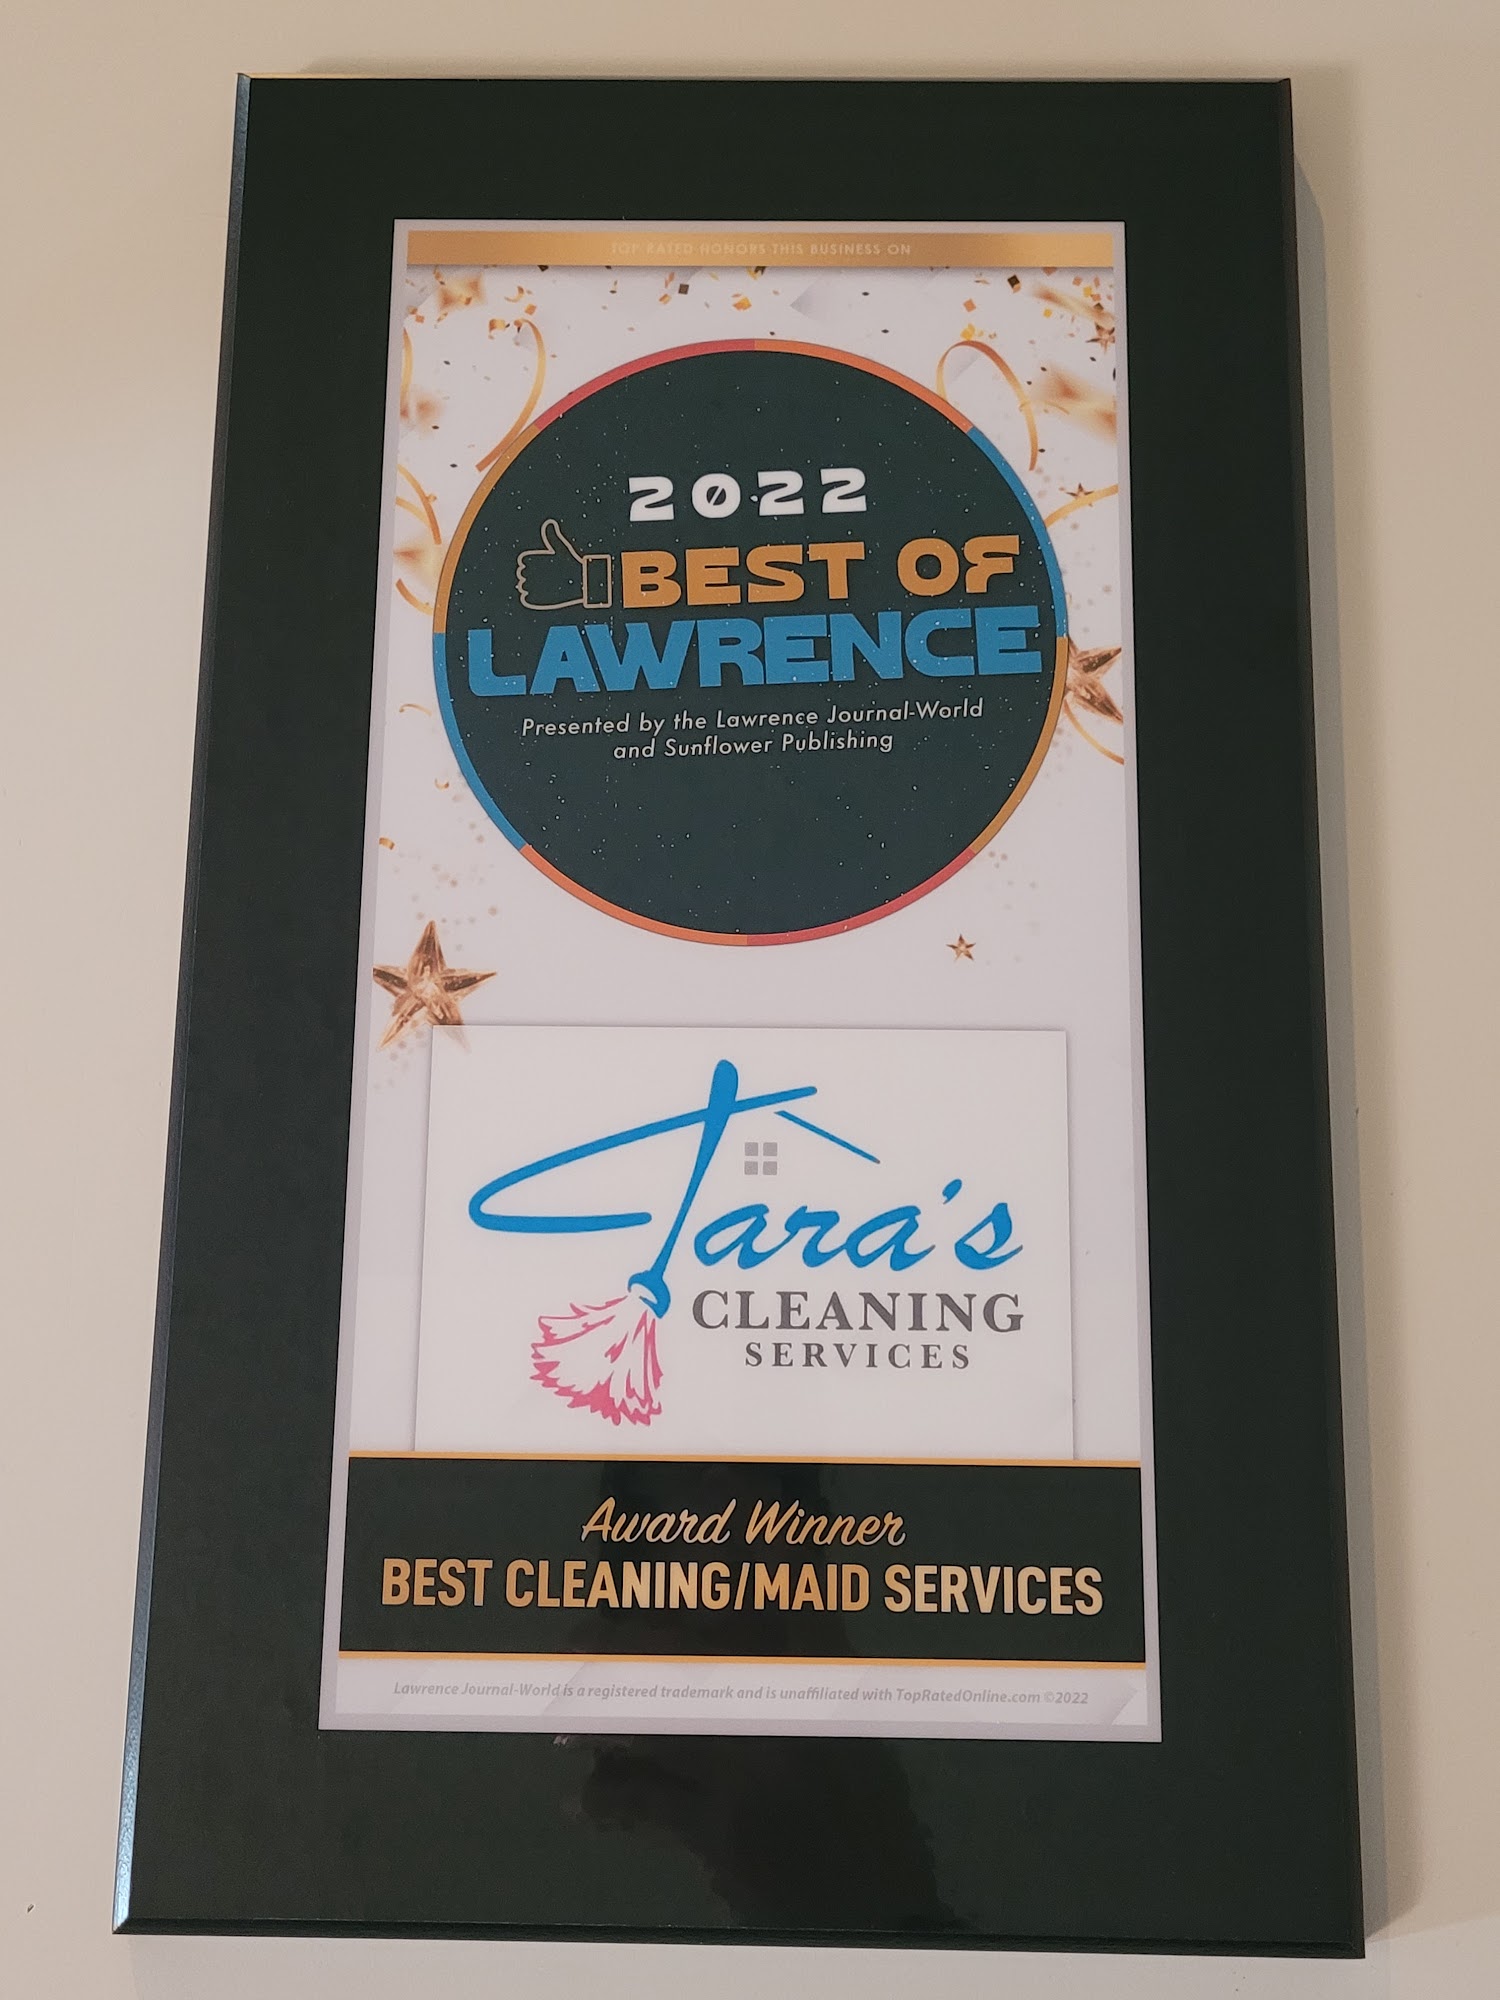 Tara's Cleaning Services